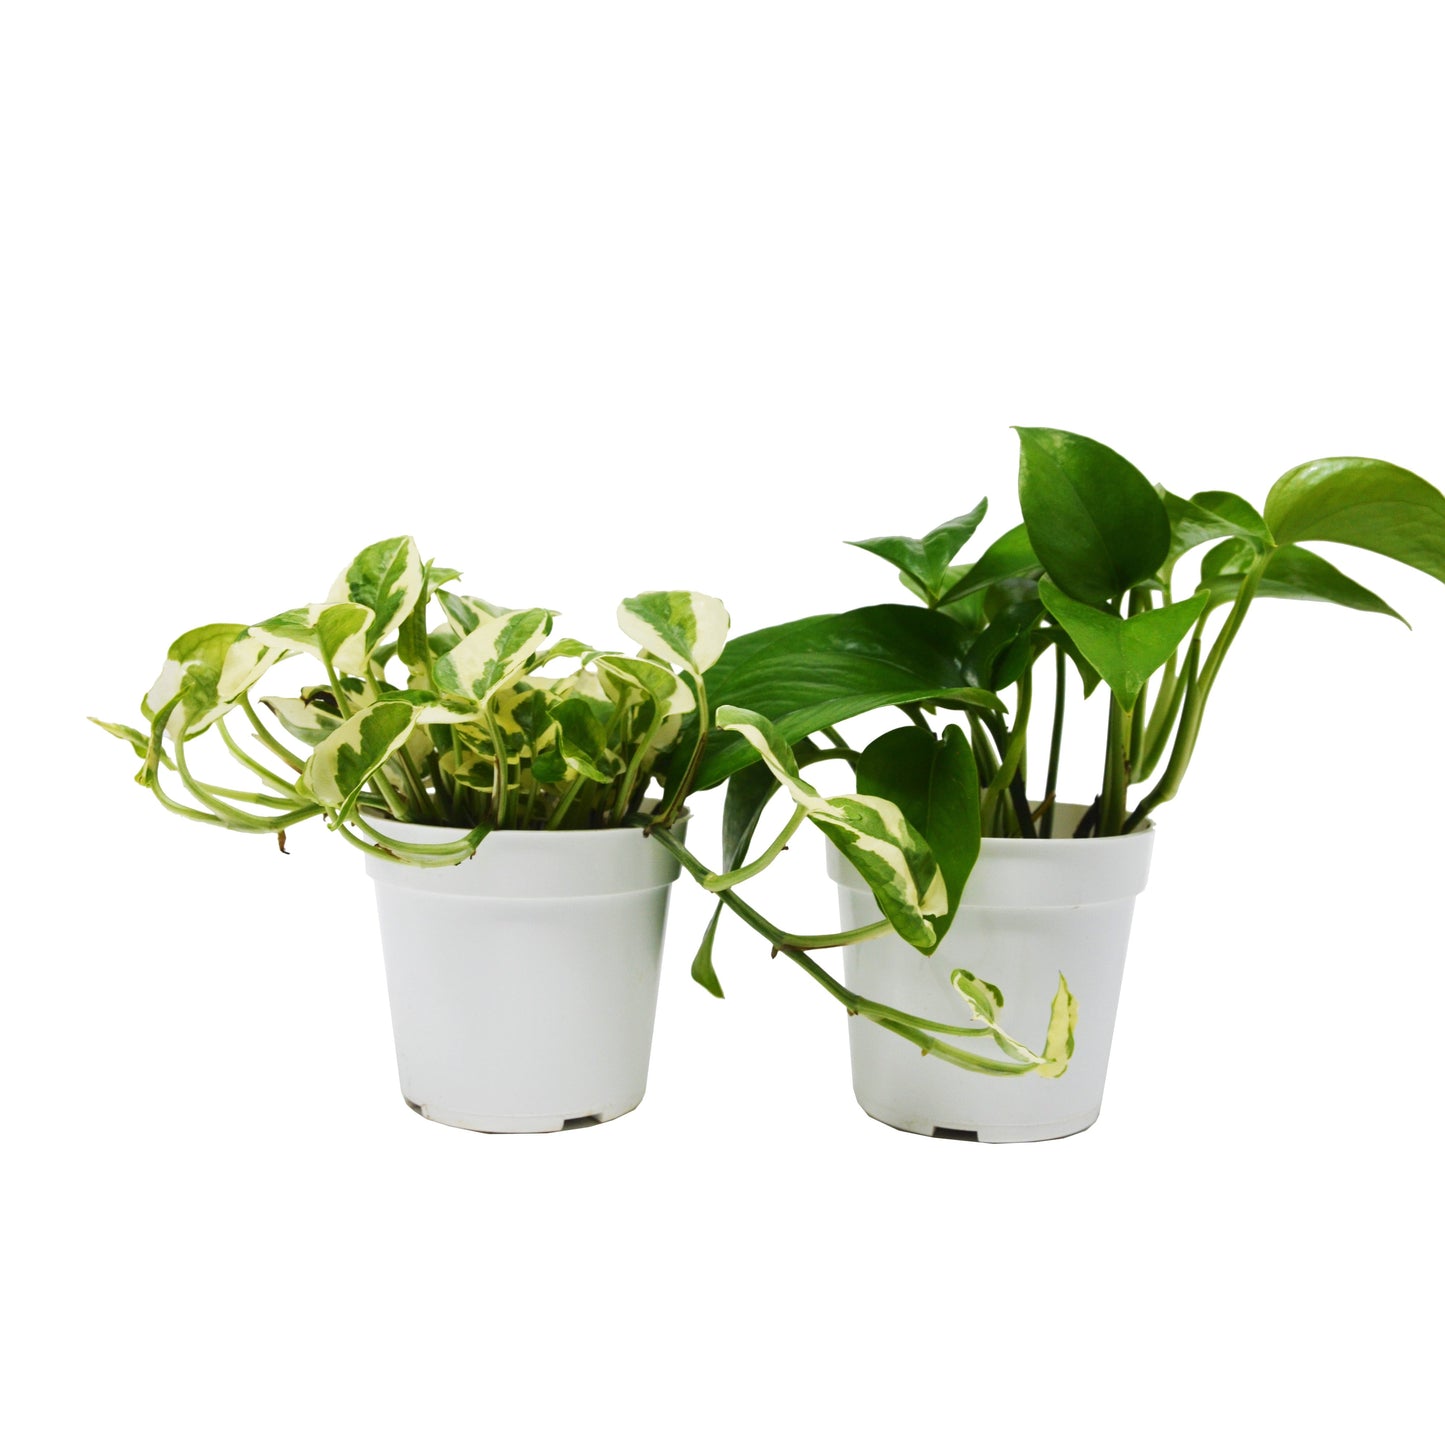 2 Pothos Variety Pack / 4" Pot / Live Plant / Home and Garden Plants